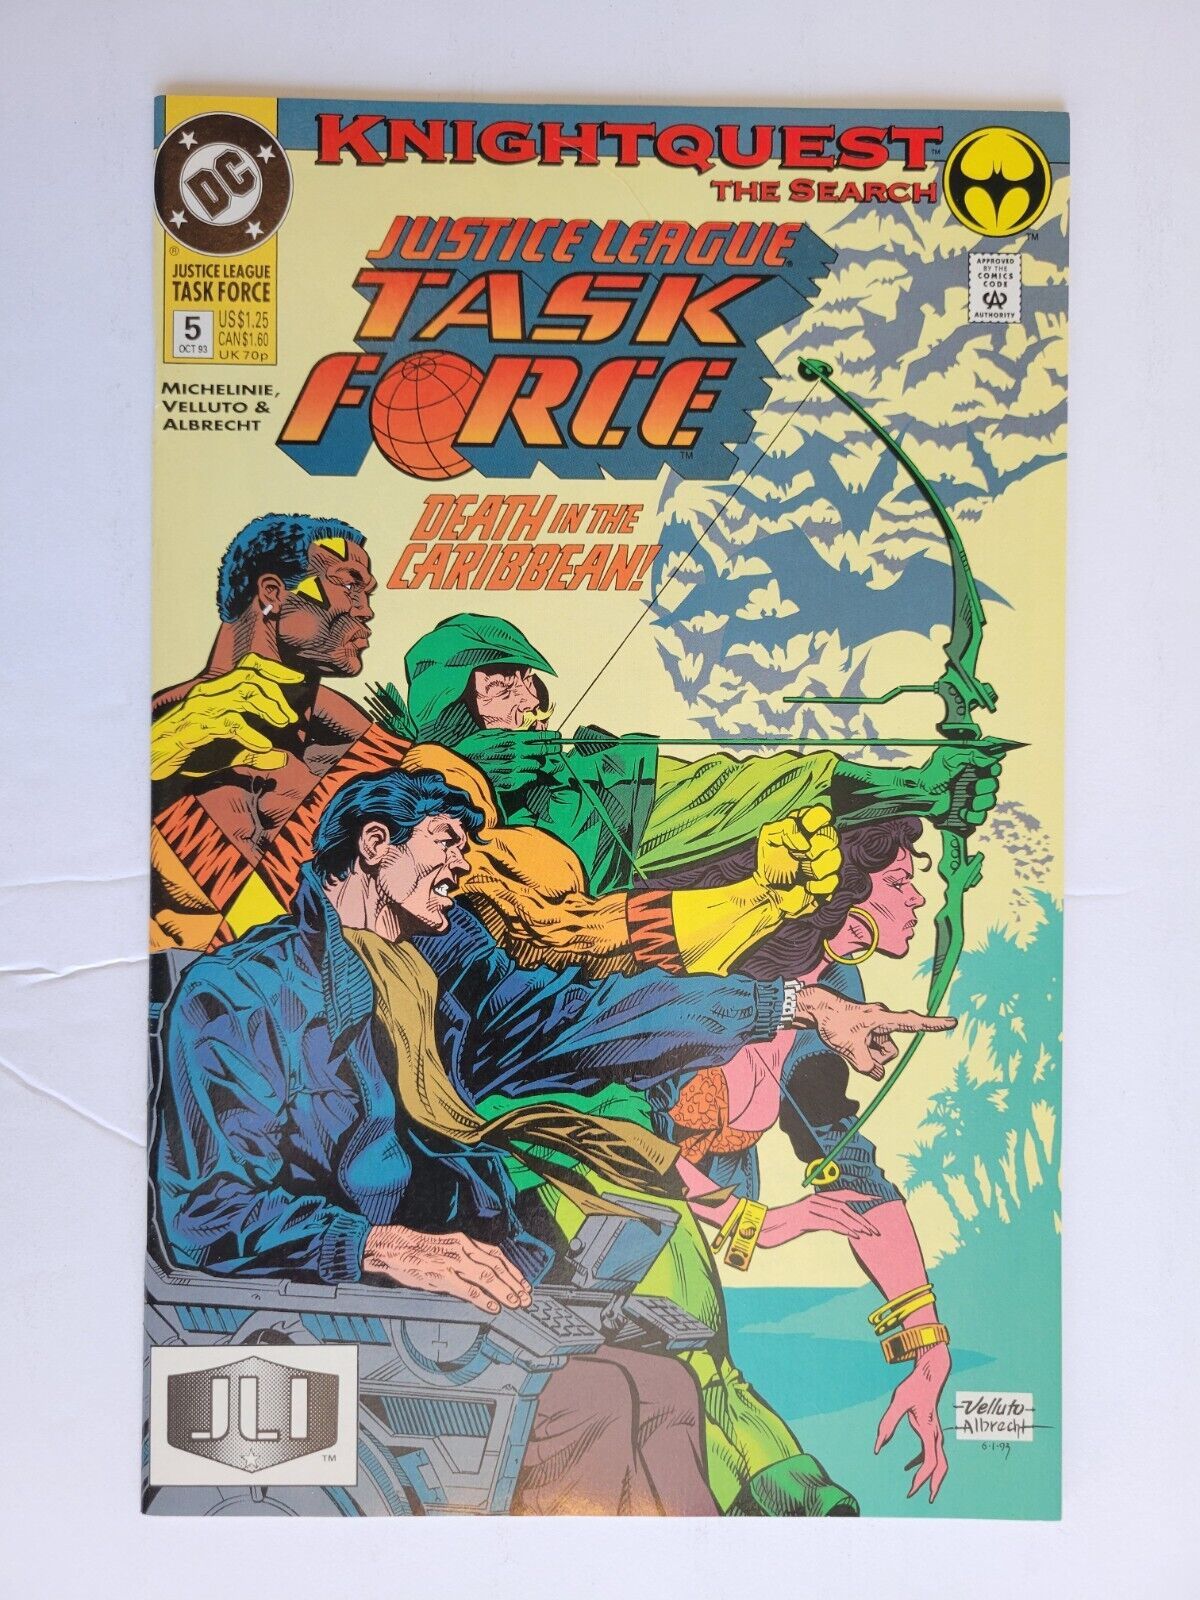 Primary image for ($5 MINIMUM ORDER) JUSTICE LEAGUE TASK FORCE  #5   VF  COMBINE SHIPPING BX2451